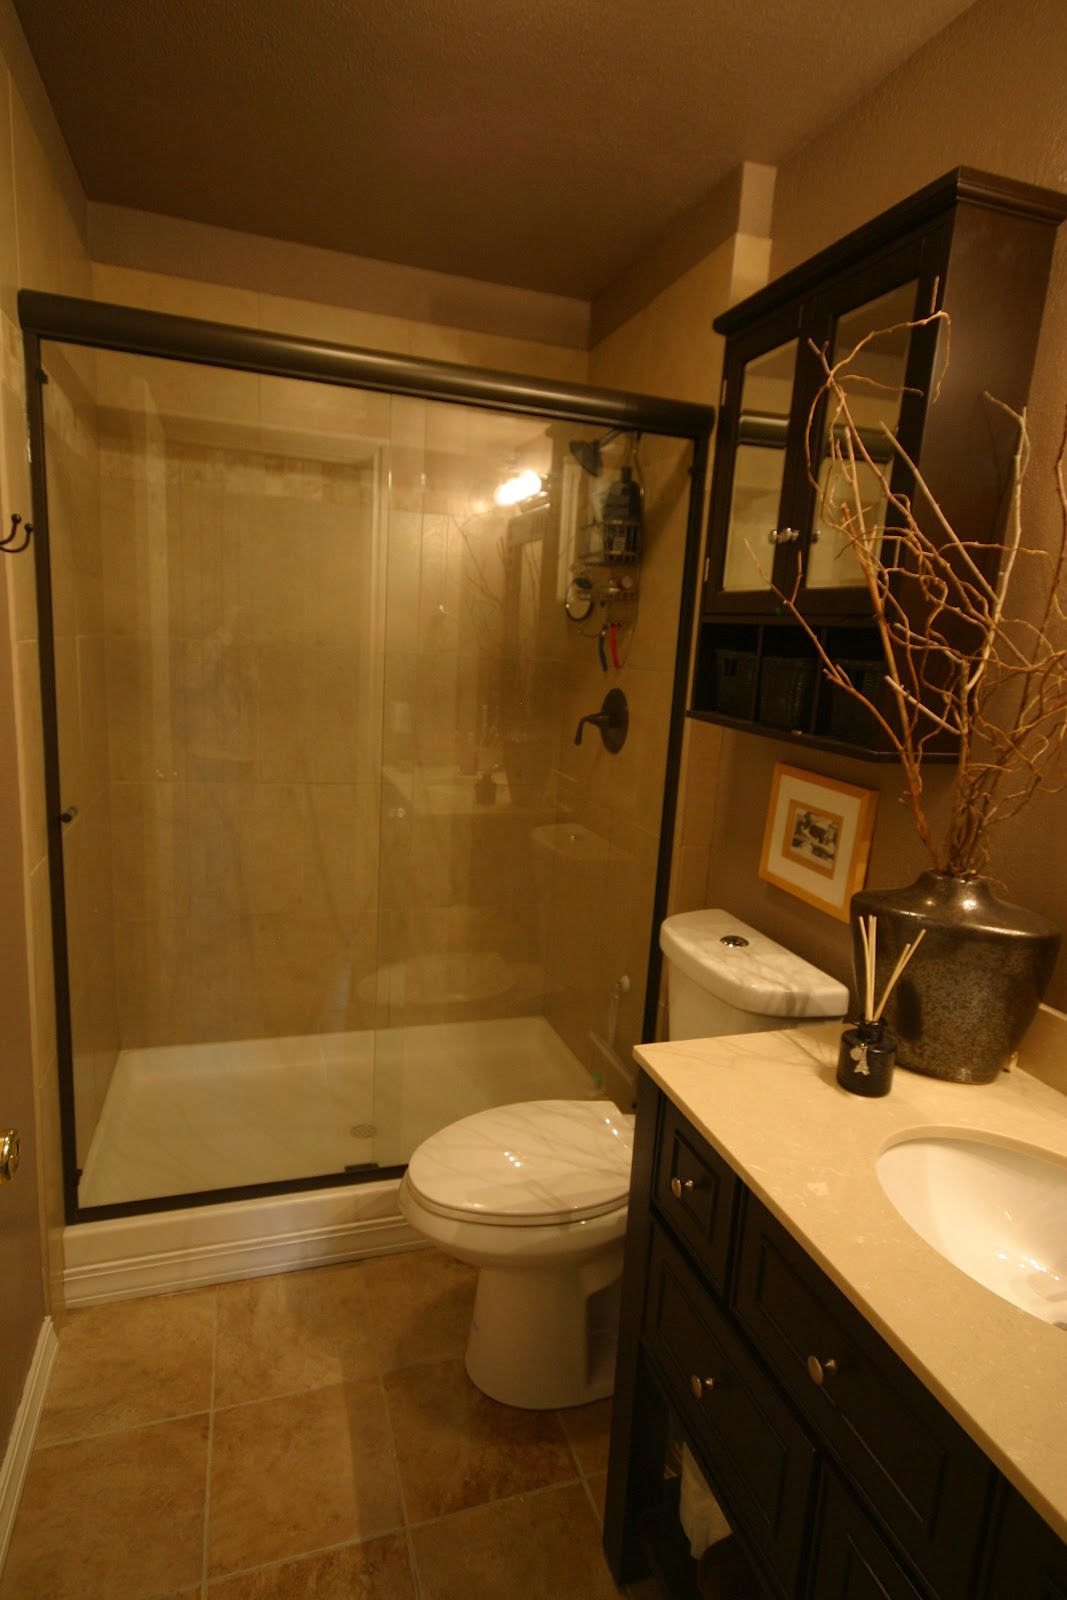 Remodel Small Bathroom With Shower
 Small Bathroom Remodels Maximal Outlook in Minimal Space